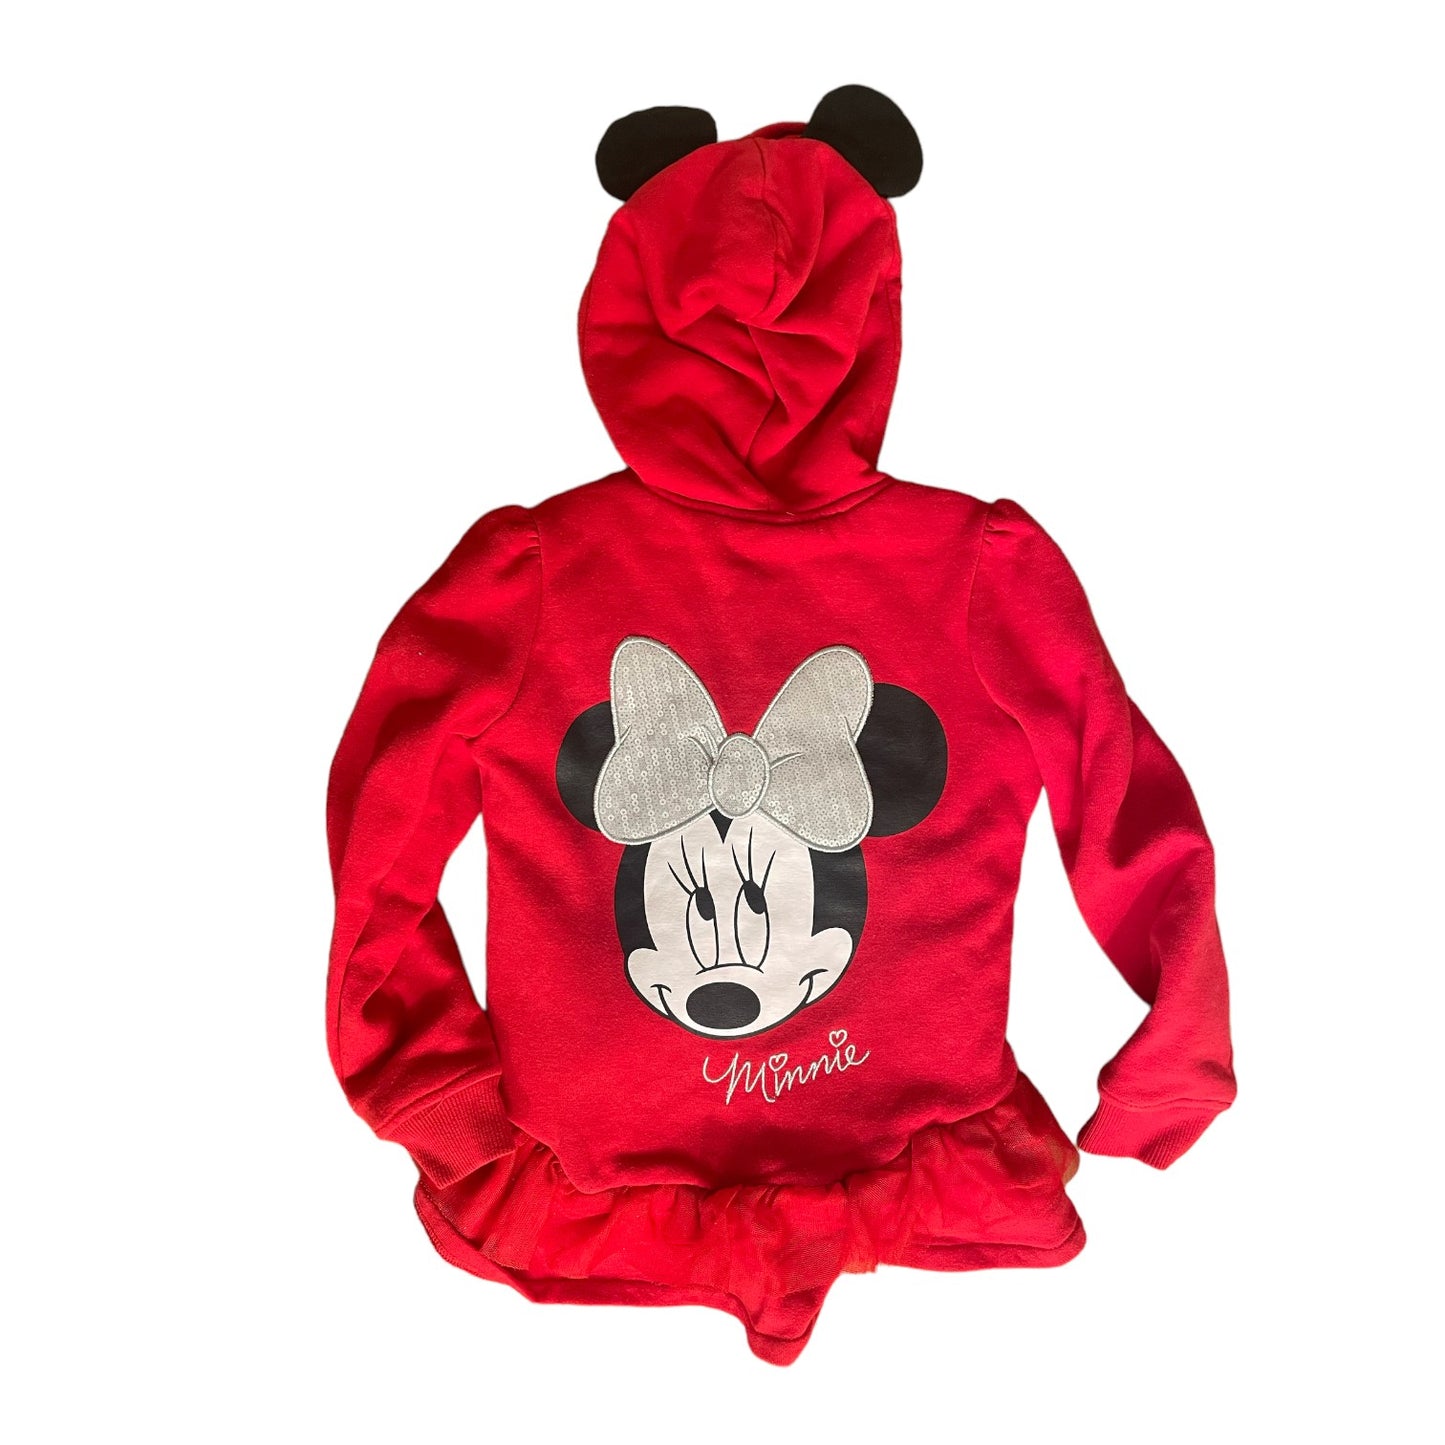 Disney Girls Jacket and Hoodie Minnie Mouse Size 7-8